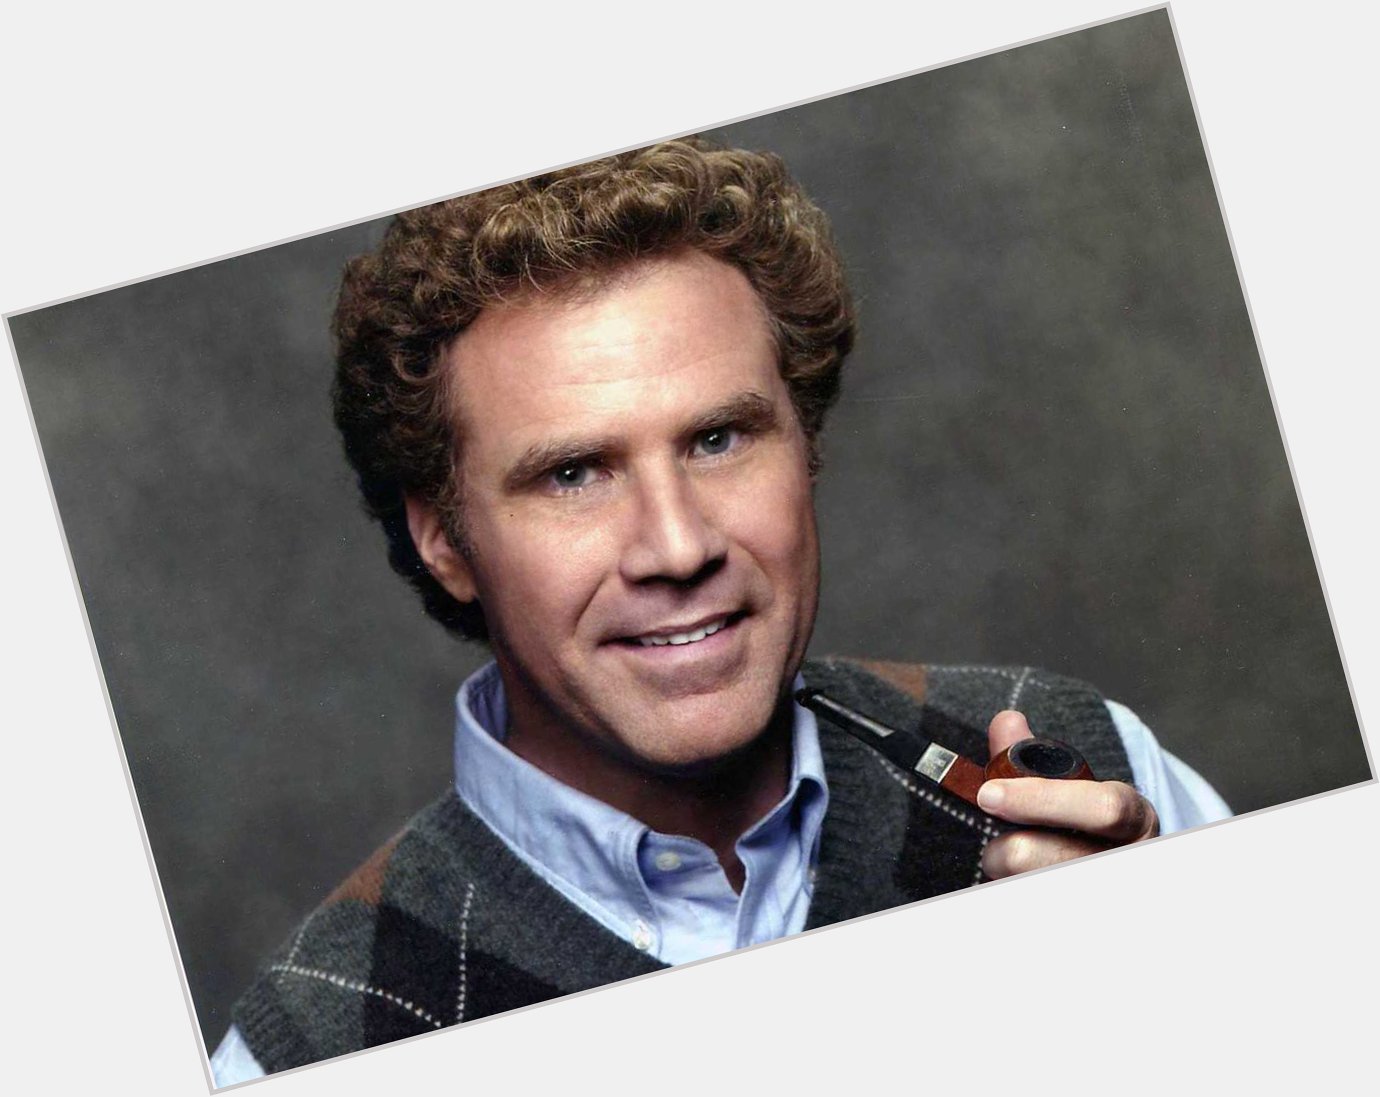 Happy birthday Will Ferrell! He is 50 today! 